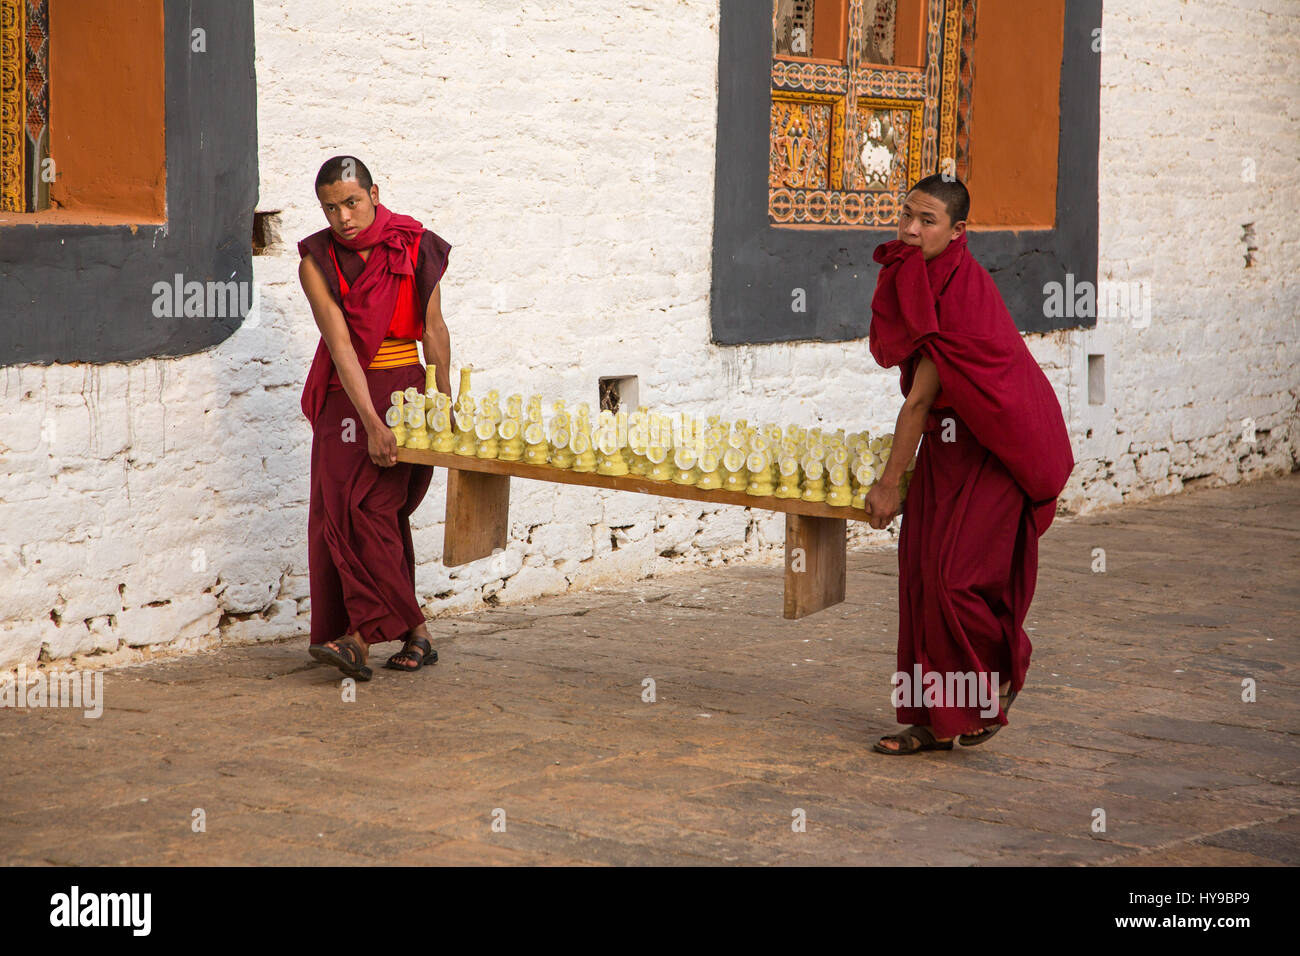 Two young Buddhist monks carrying torma or yak butter sculptures for a Bhuddist ceremony in the Punakha Dzong, Punakha, Bhutan. Stock Photo